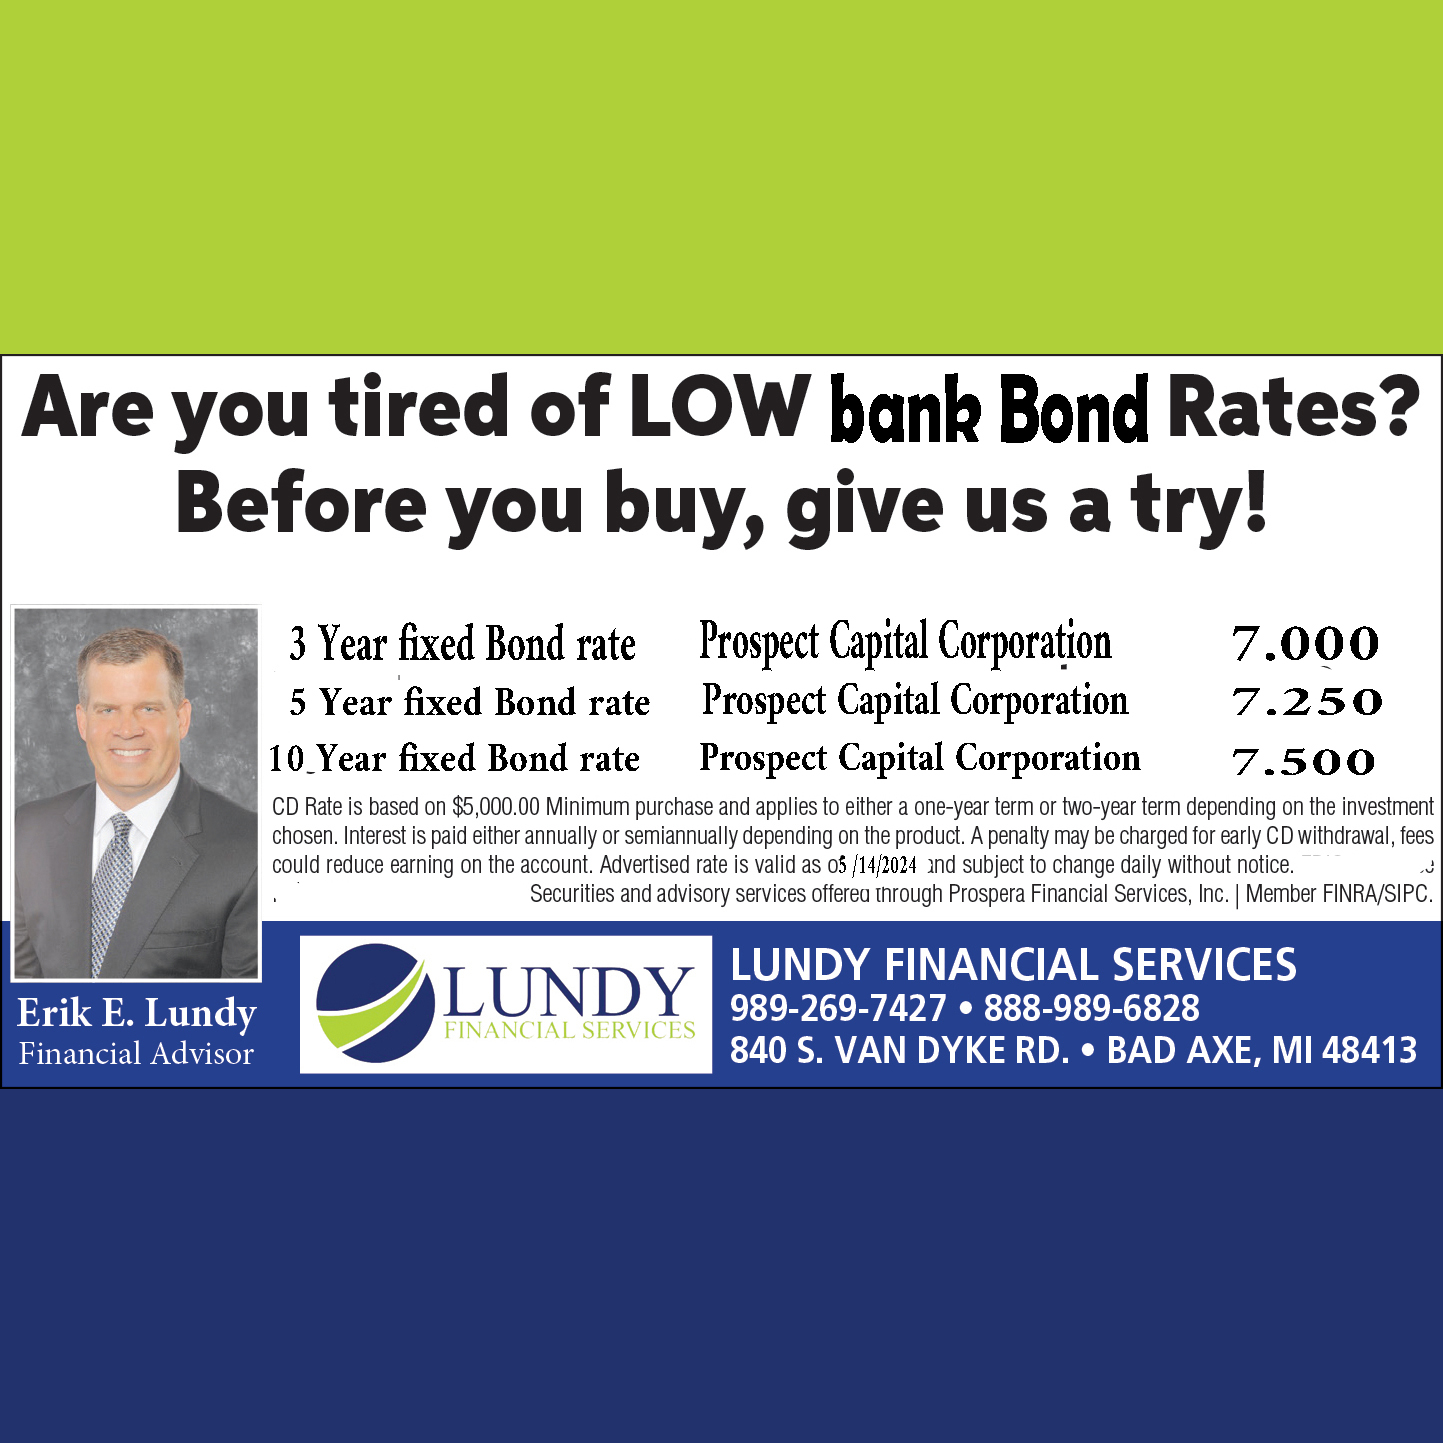 Lundy Financial Services